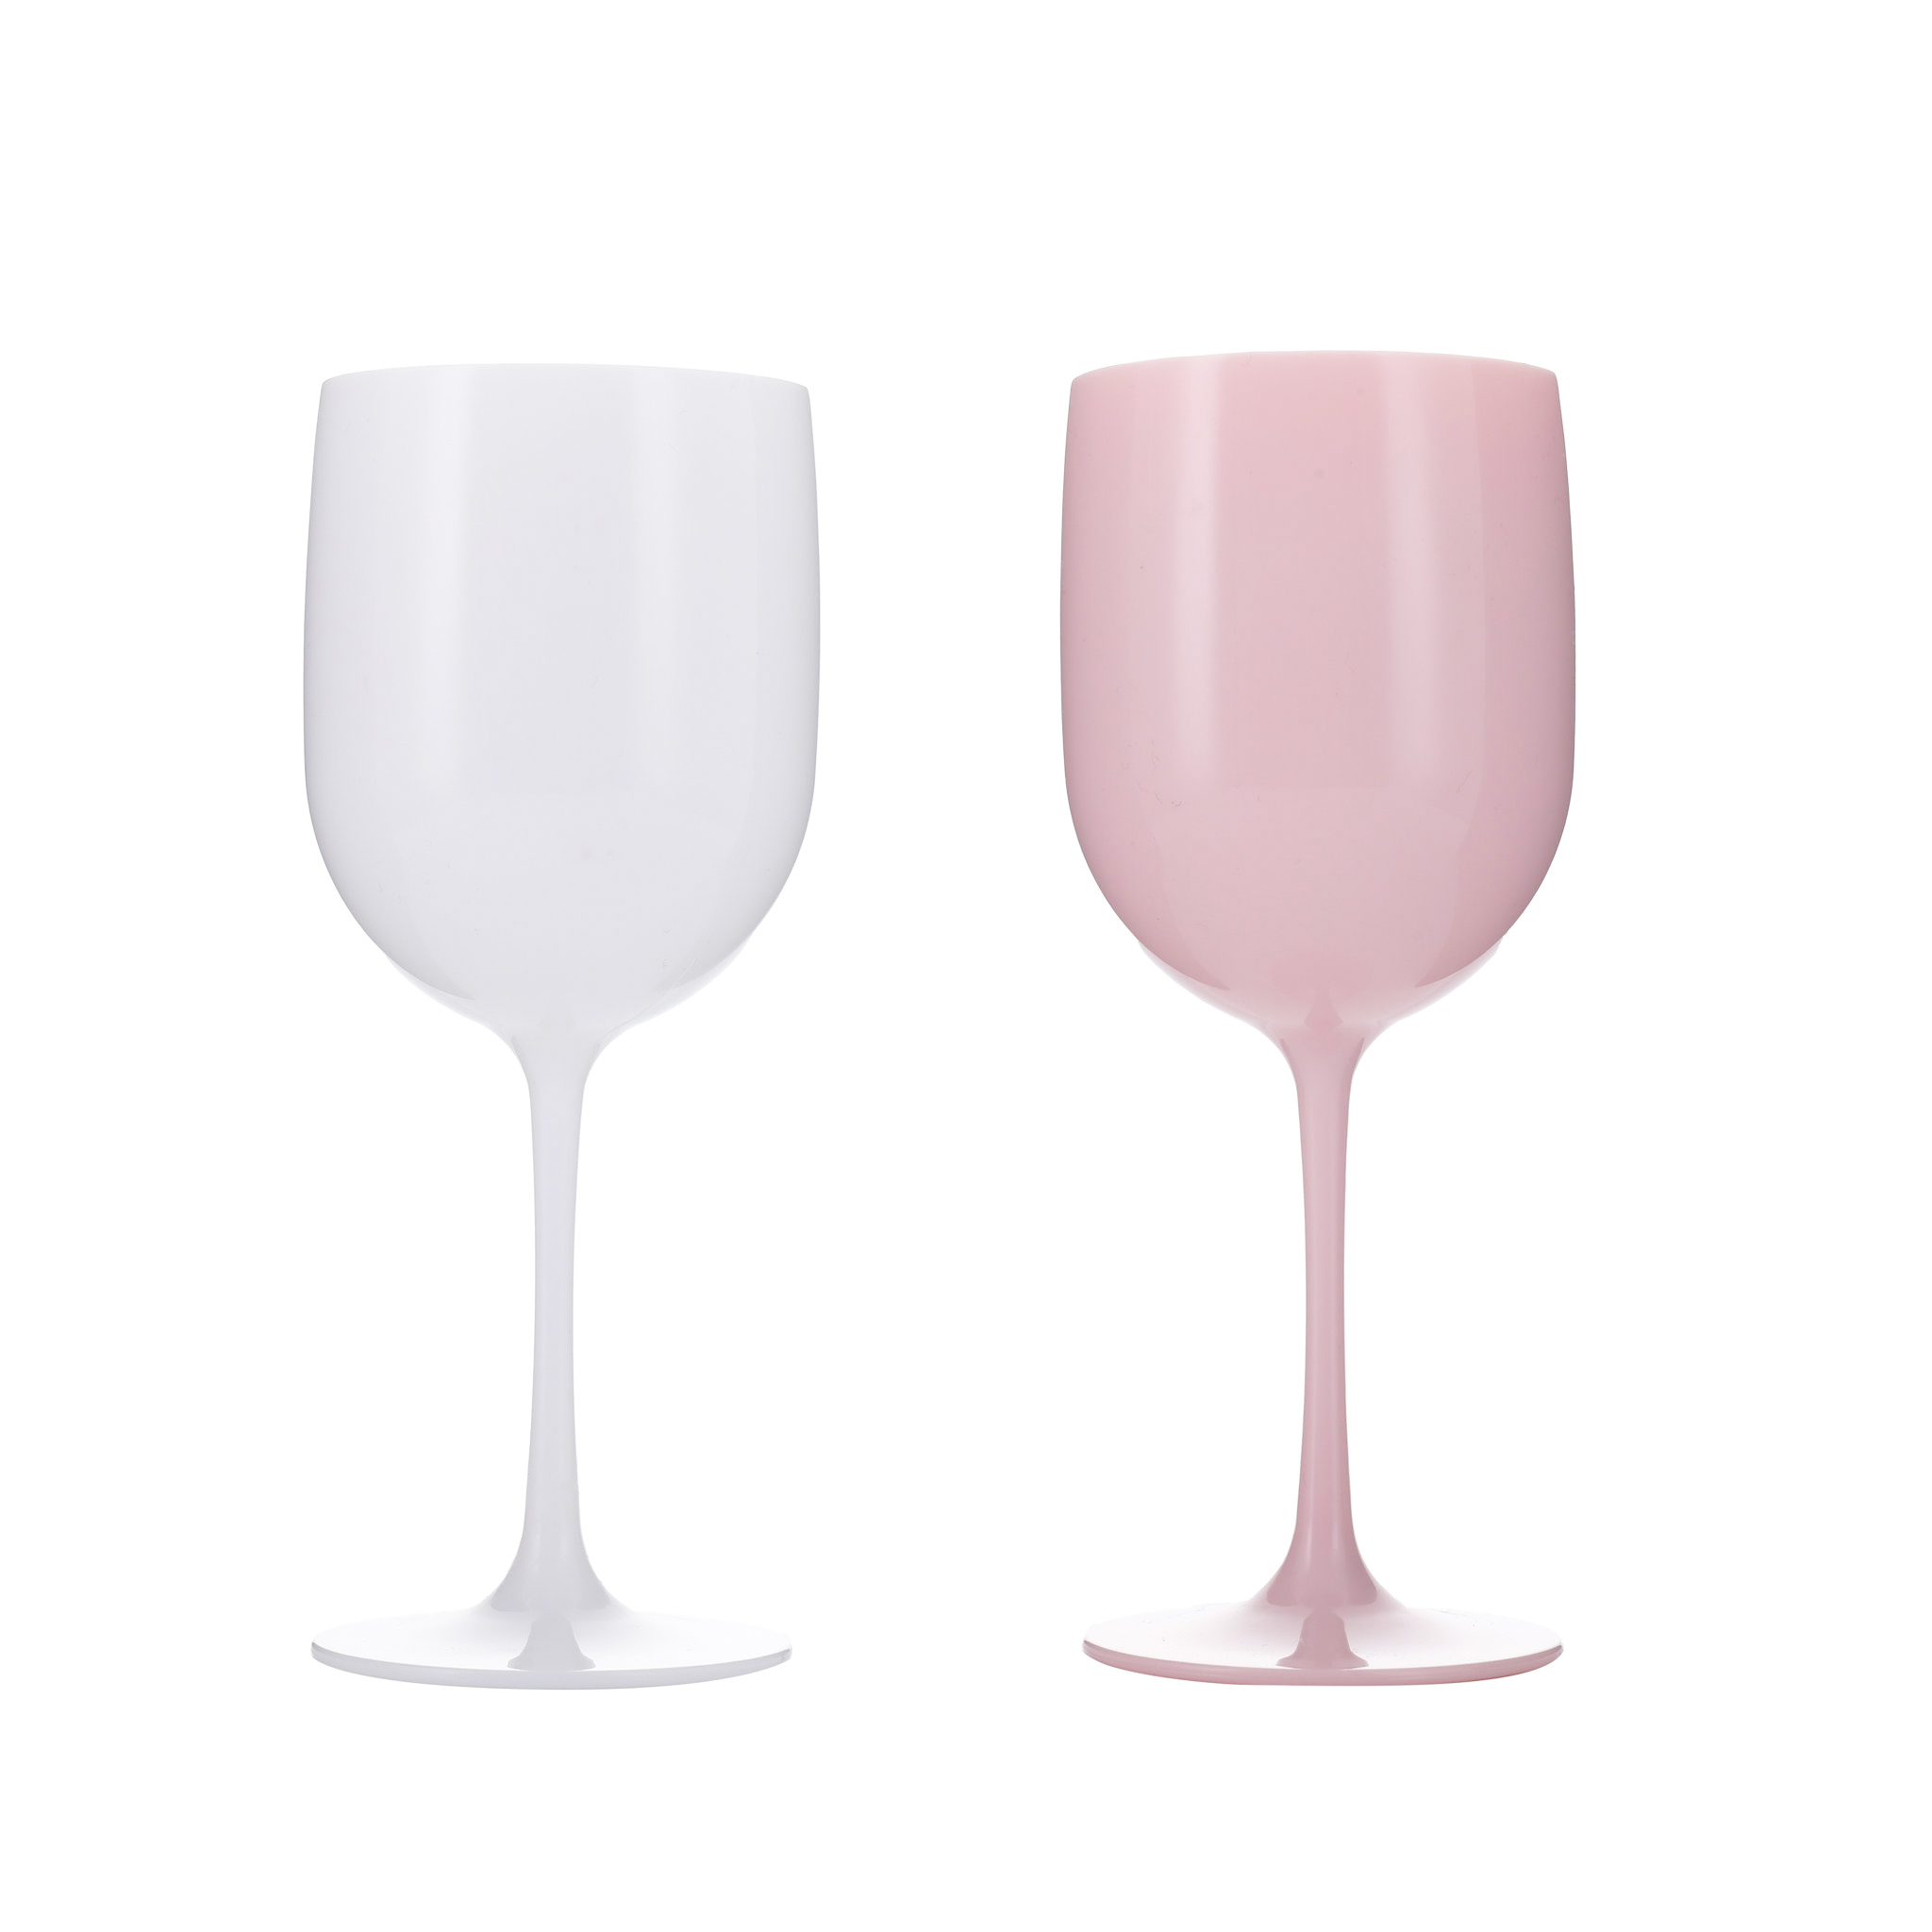 10 oz. Promotional Colored Plastic Wine Glass2